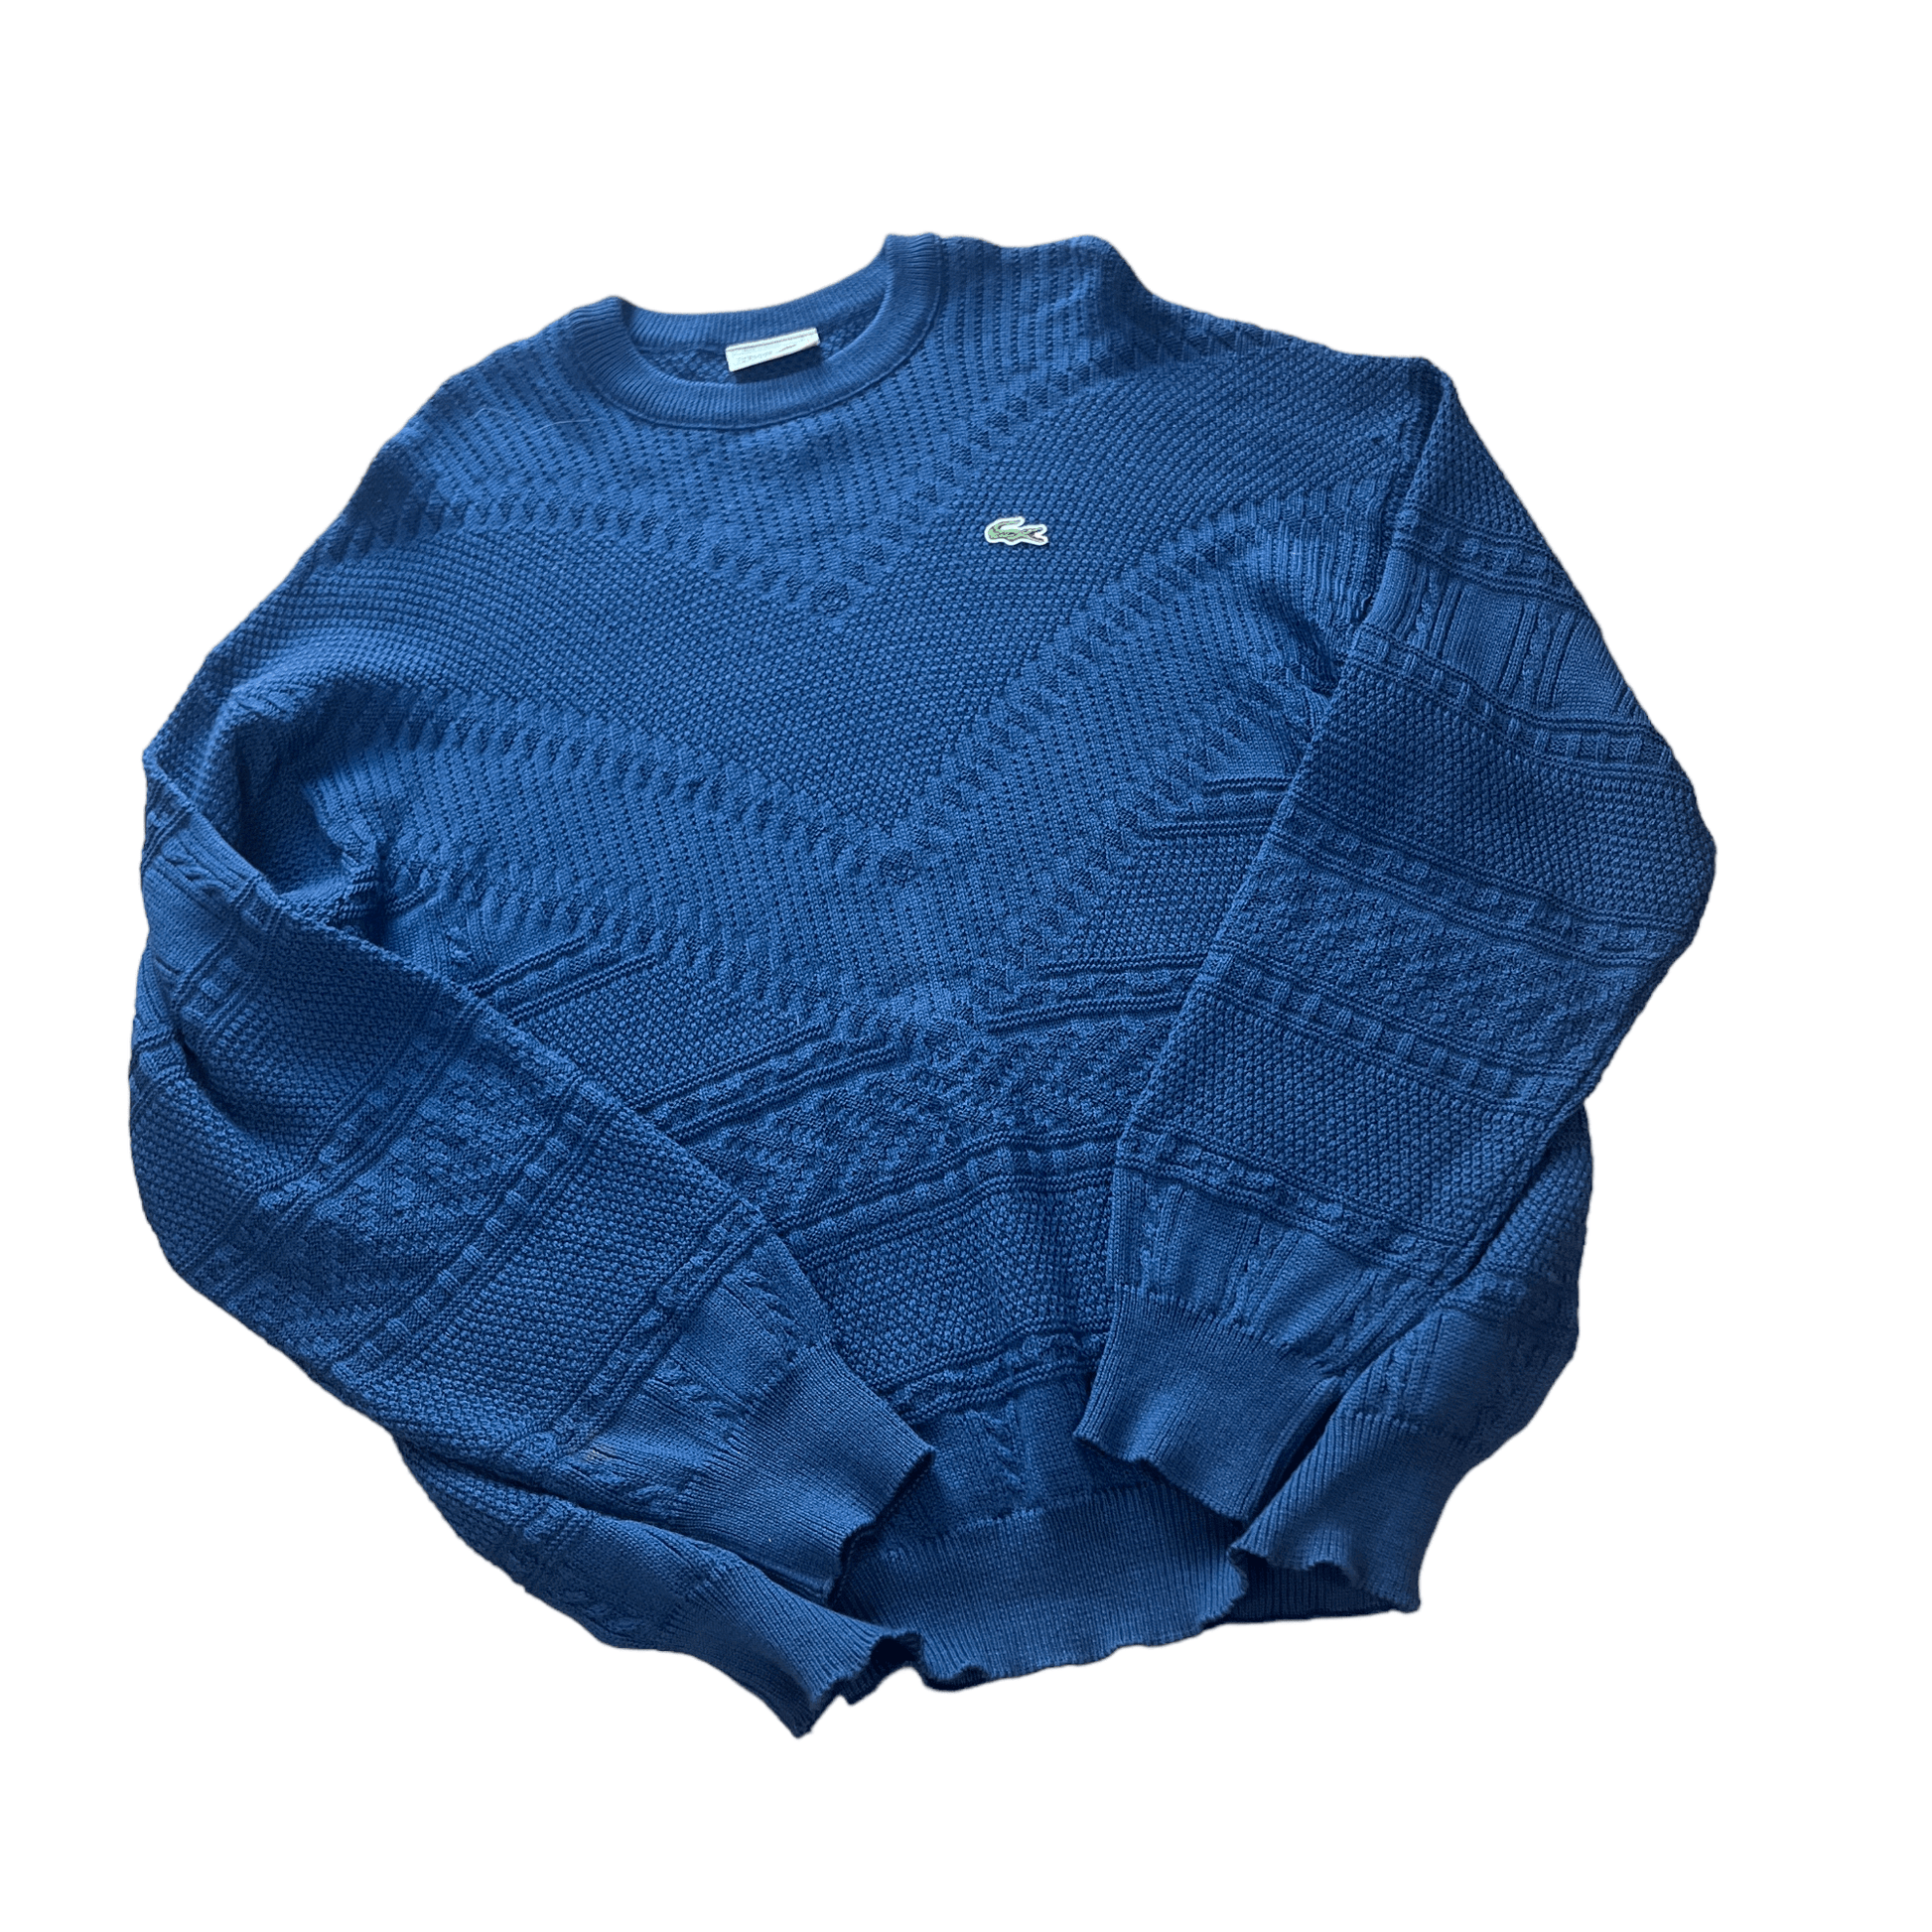 Vintage 90s Navy Blue Chemise Lacoste Knitted Sweatshirt - Extra Large - The Streetwear Studio